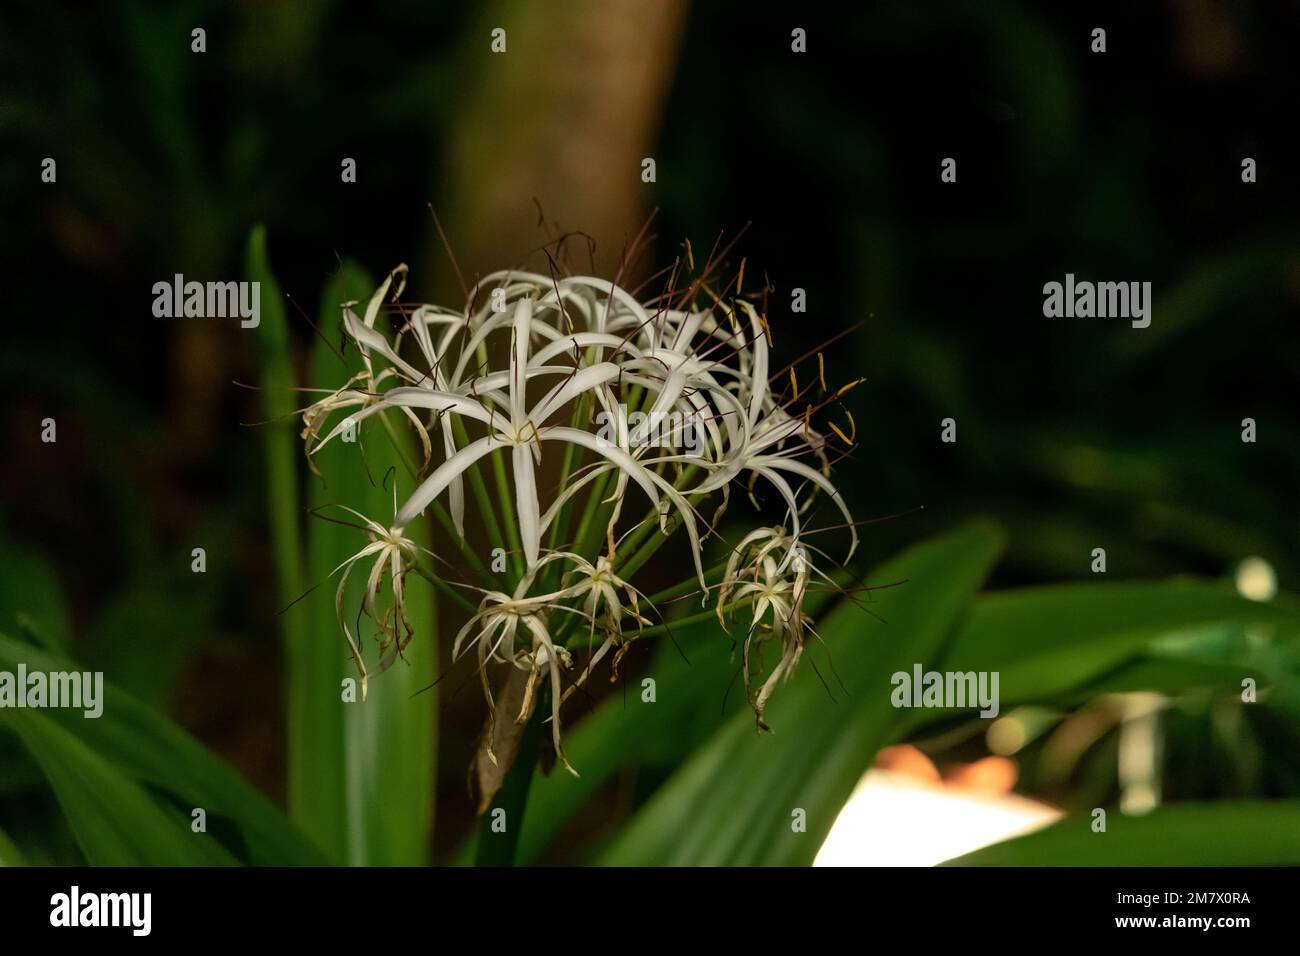 A closeup of Crinum asiaticum, commonly known as poison bulb, giant crinum lily. Stock Photo